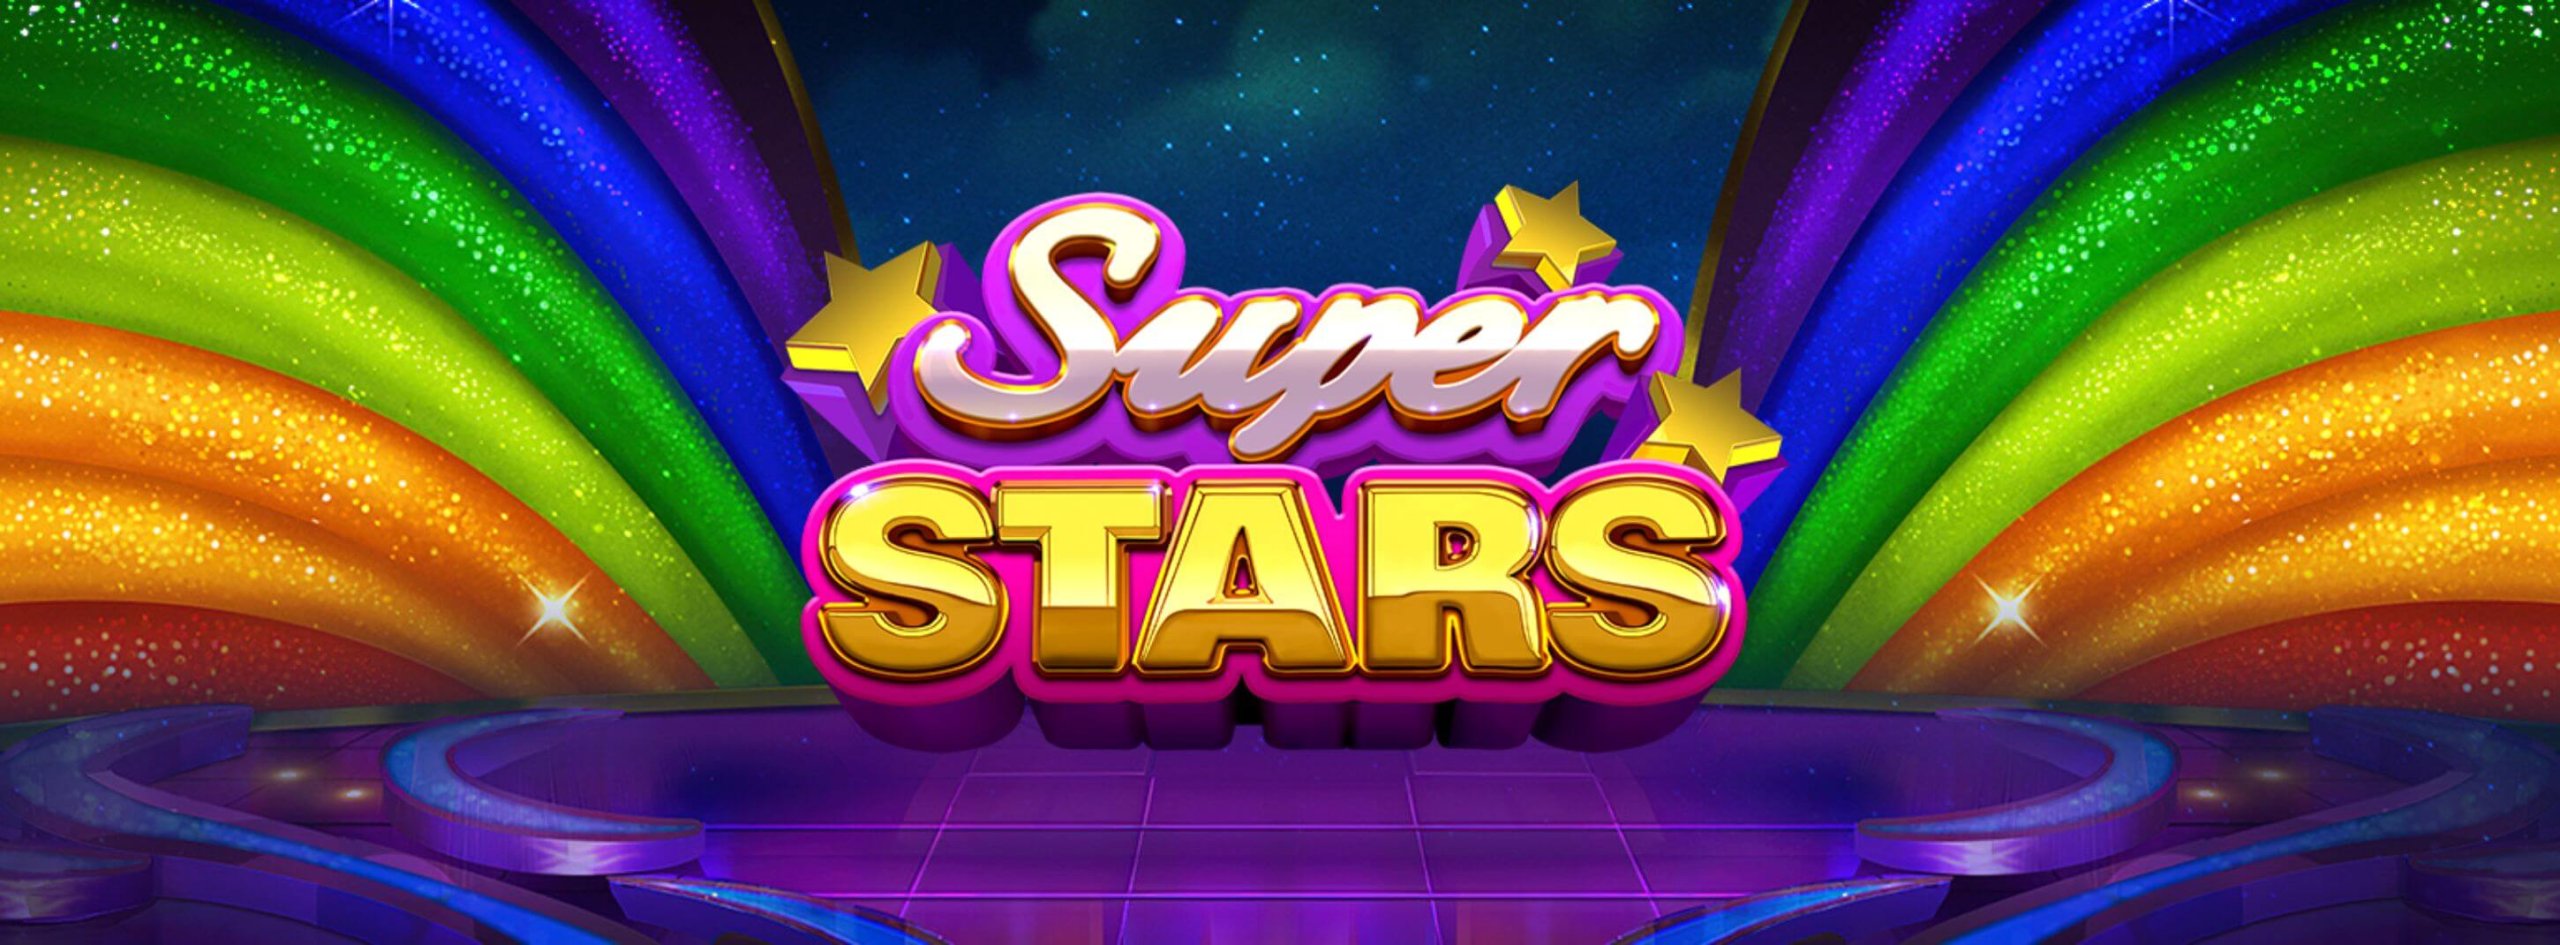 New SuperStars Trailer Released By NetEnt